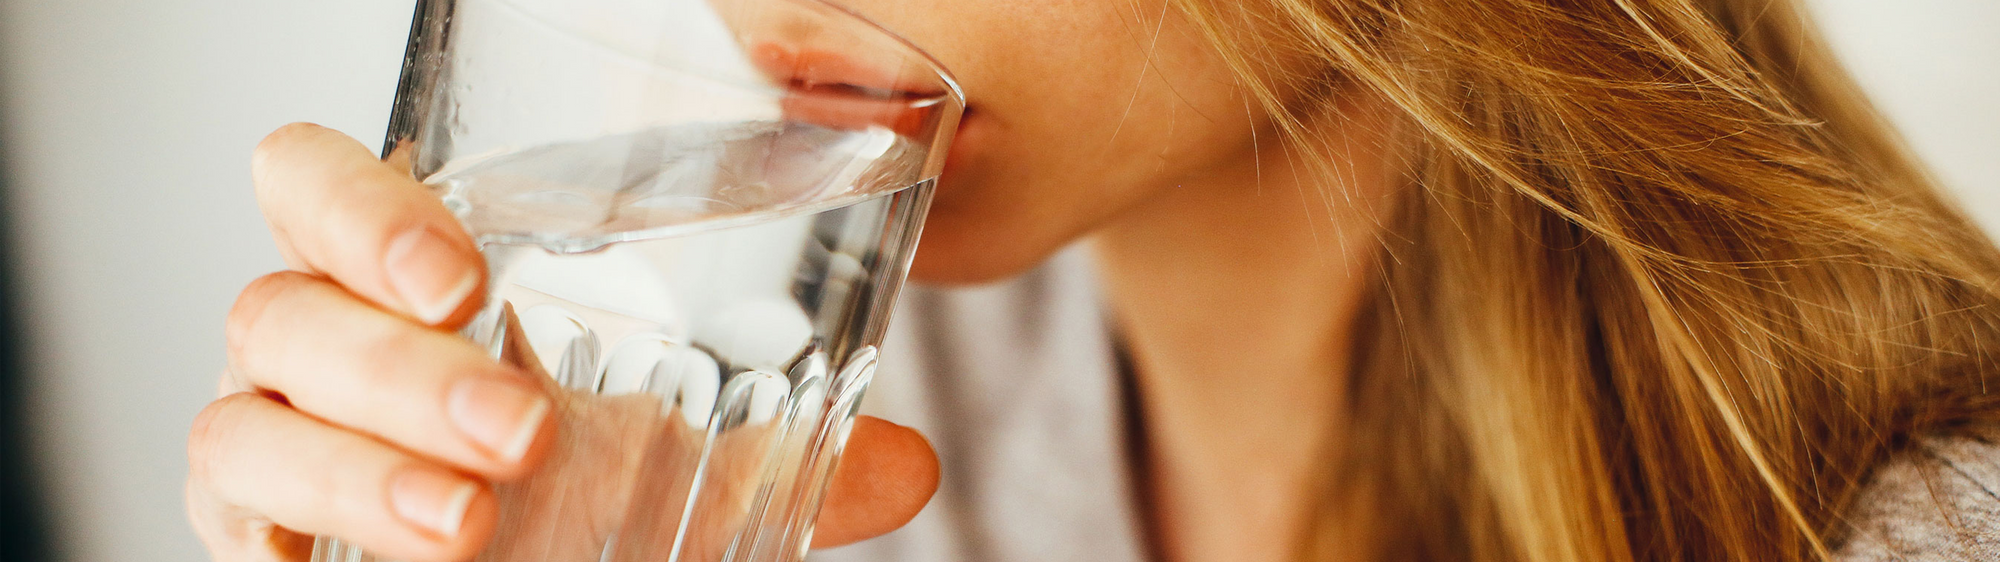 Why 'Drinking more water' should be your New Year's resolution